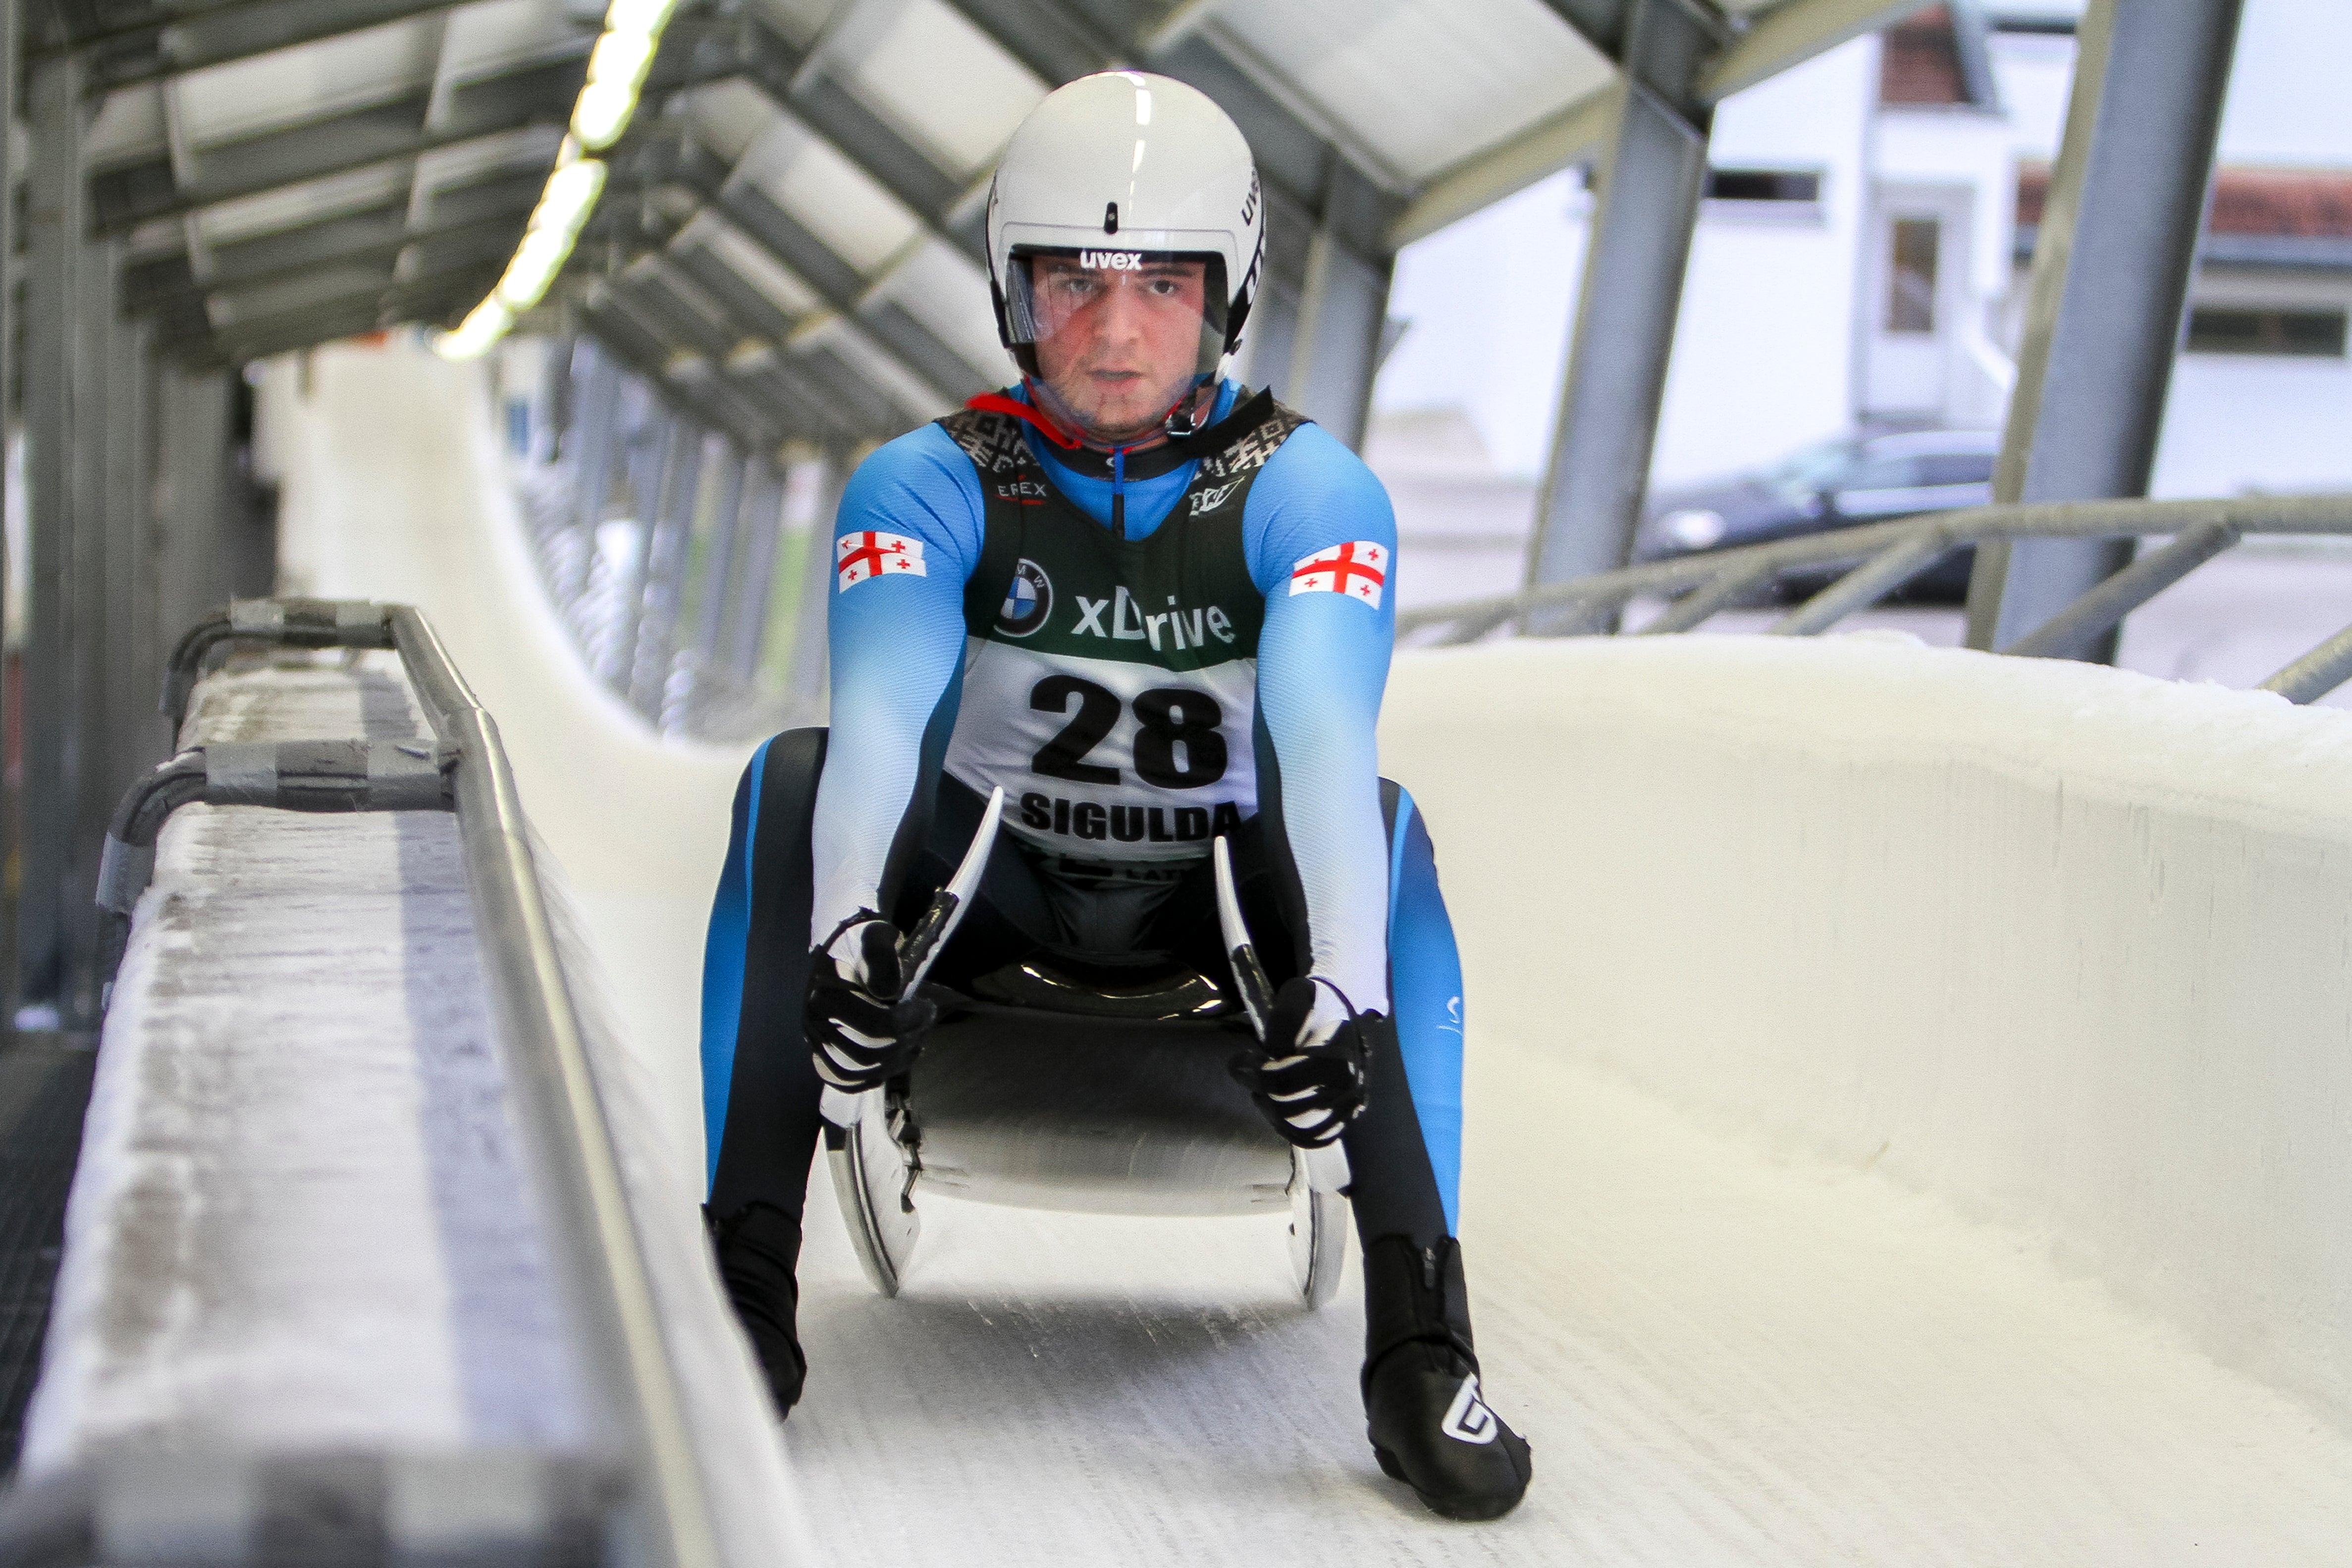 Saba Kumaritashvili pictured before a men’s race at the 52th FIL Luge European Championships in Sigulda, Latvia, in January 2021